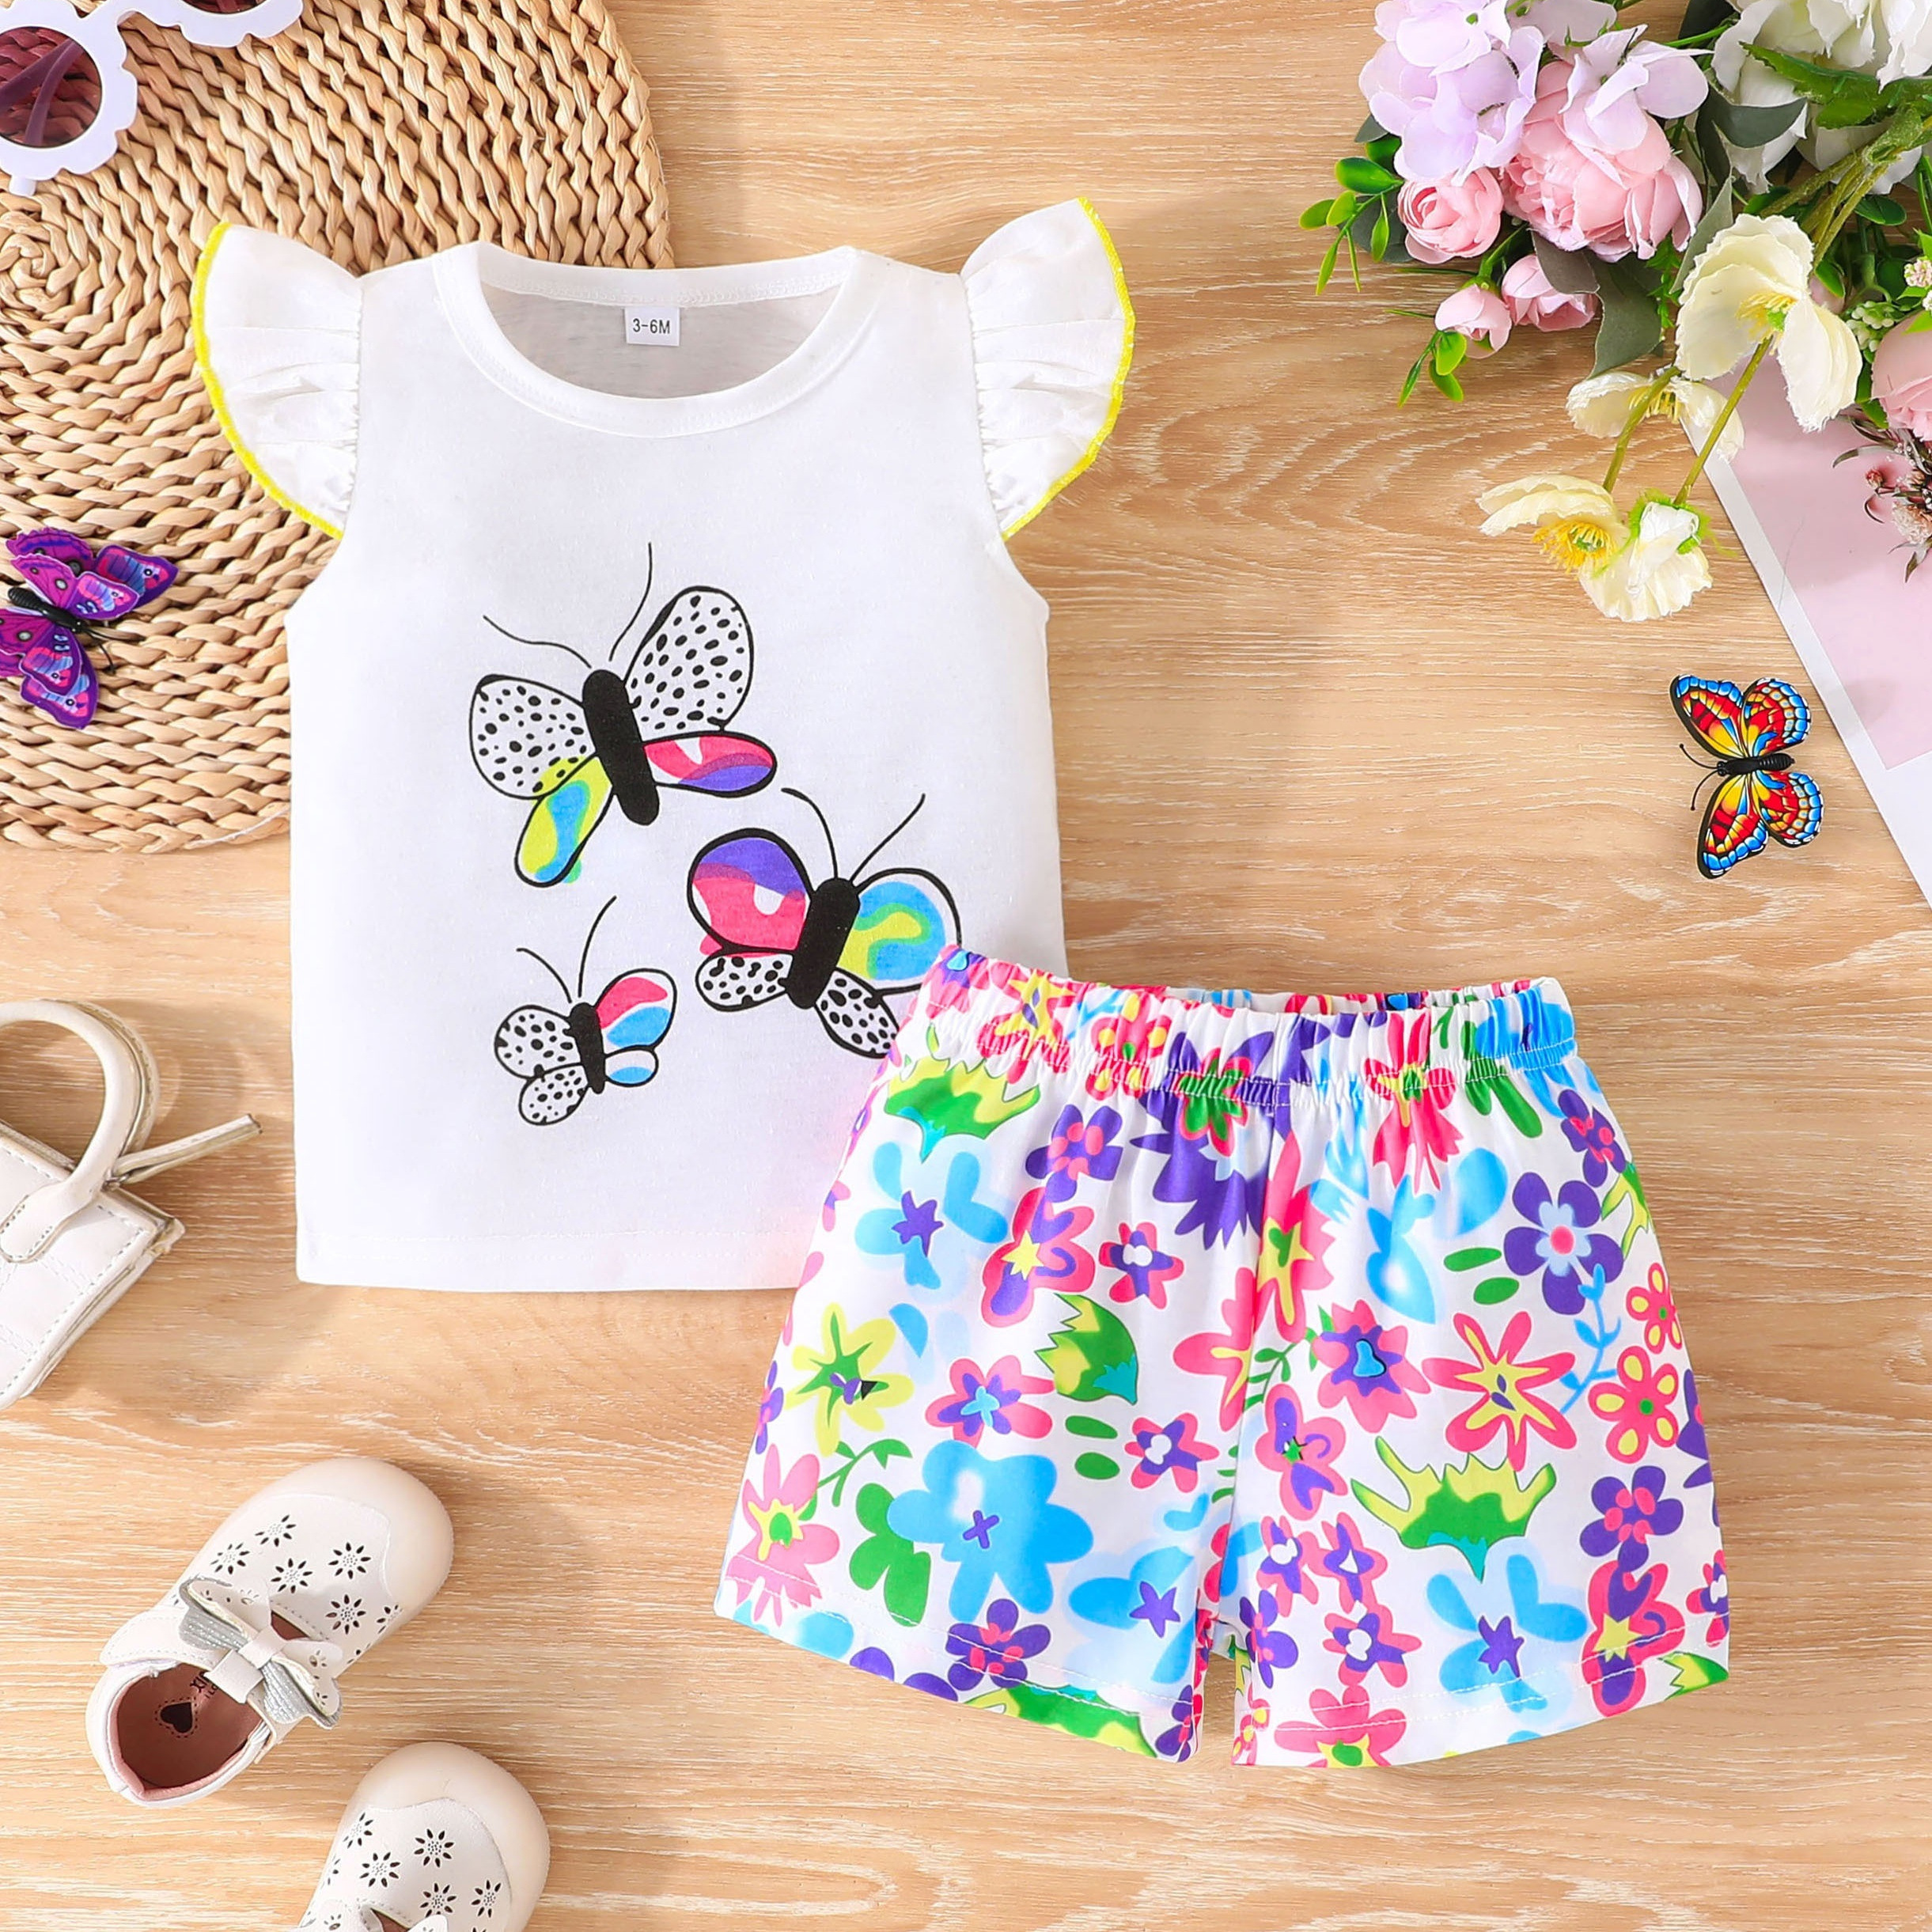 

Baby's Cartoon Butterfly Print 2pcs Casual Summer Outfit, Cap Sleeve Top & Colorful Flower Pattern Shorts Set, Toddler & Infant Girl's Clothes For Daily/holiday/party